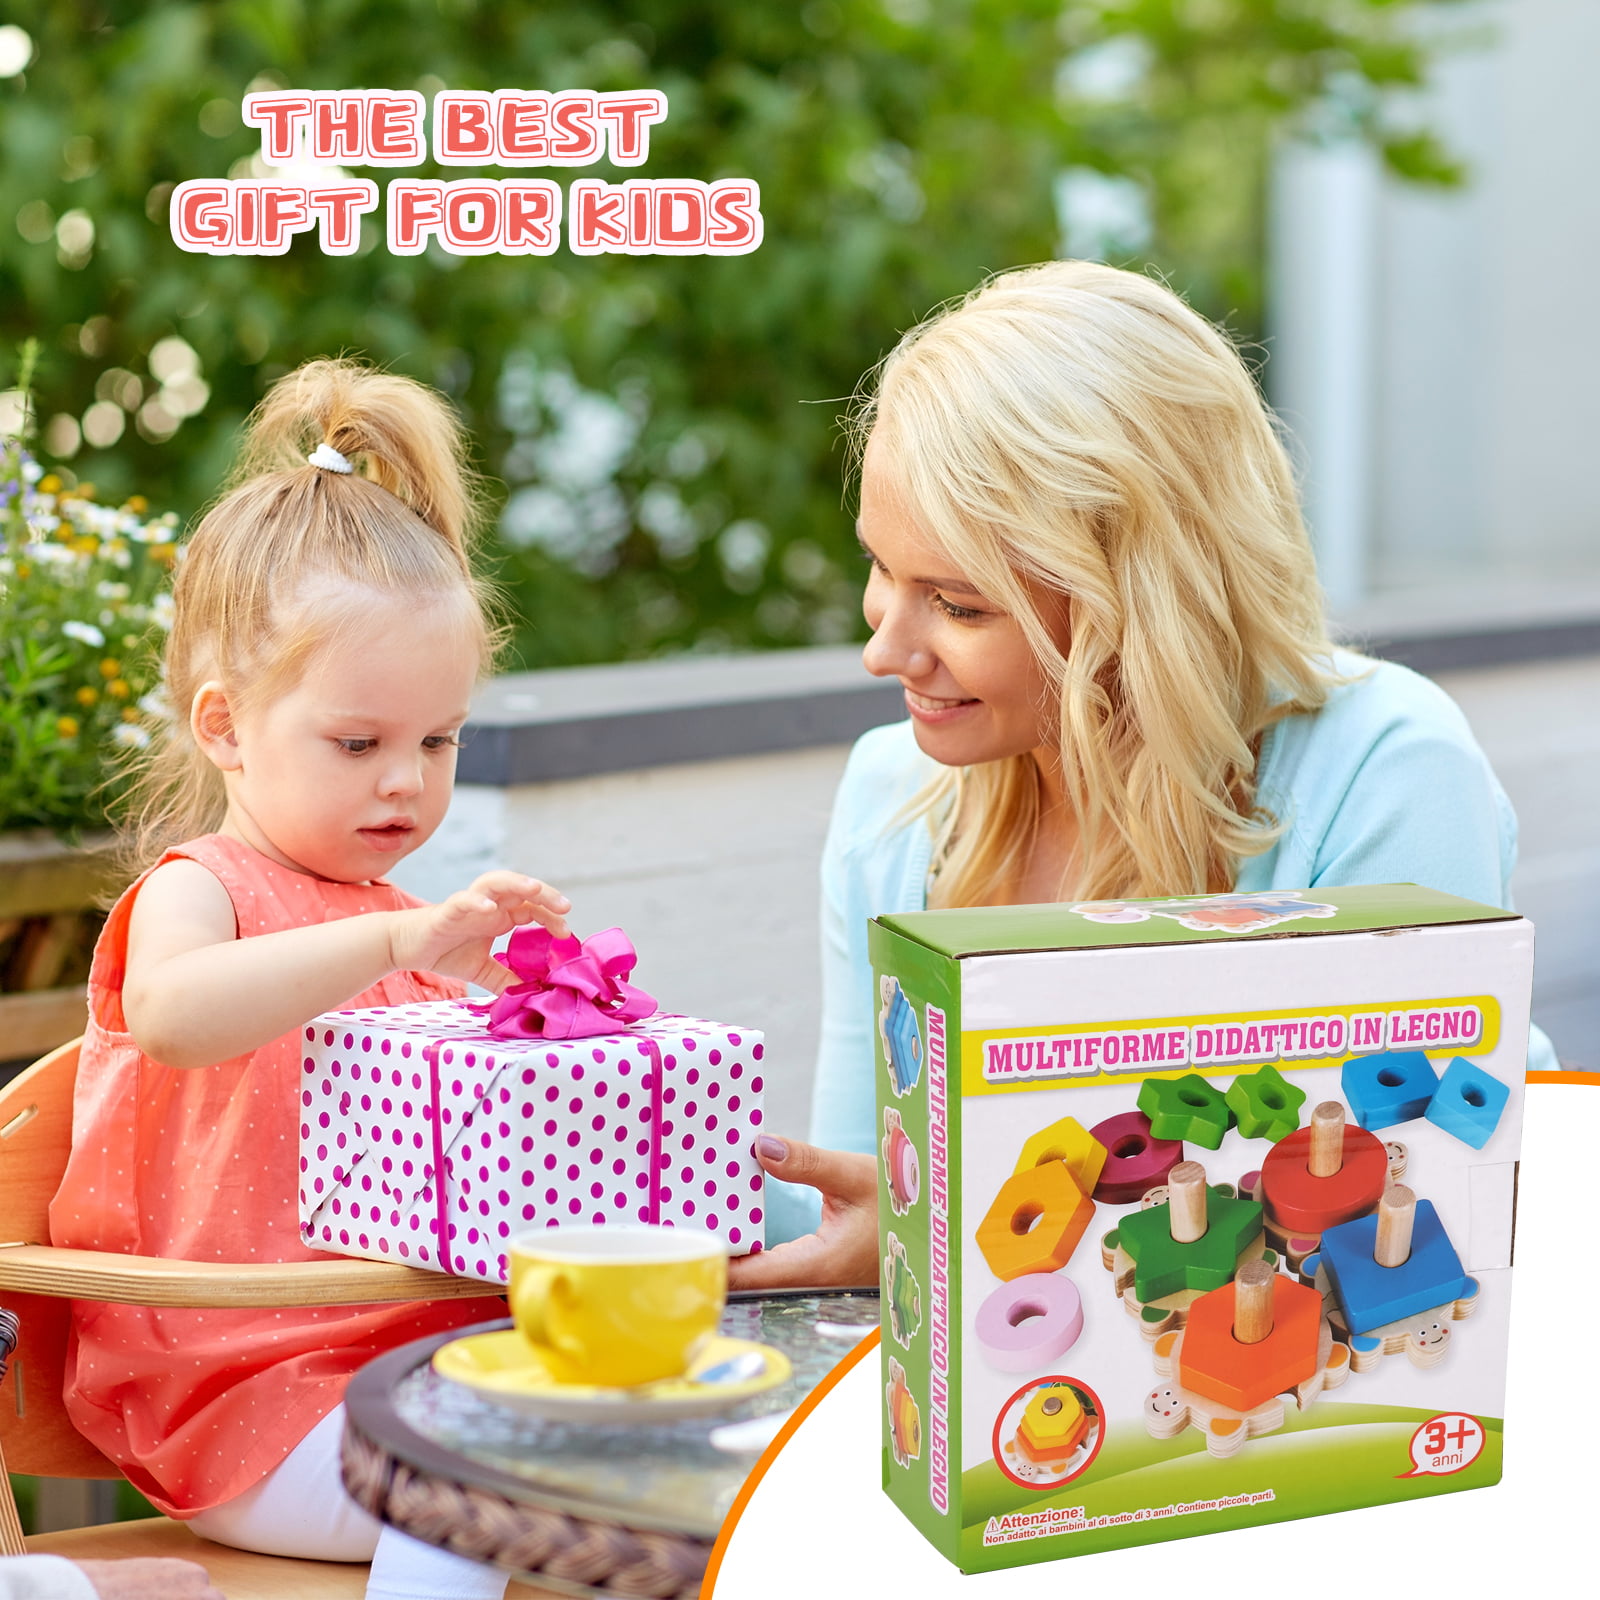 Best Gifts for 2 Year Olds - ResearchParent.com